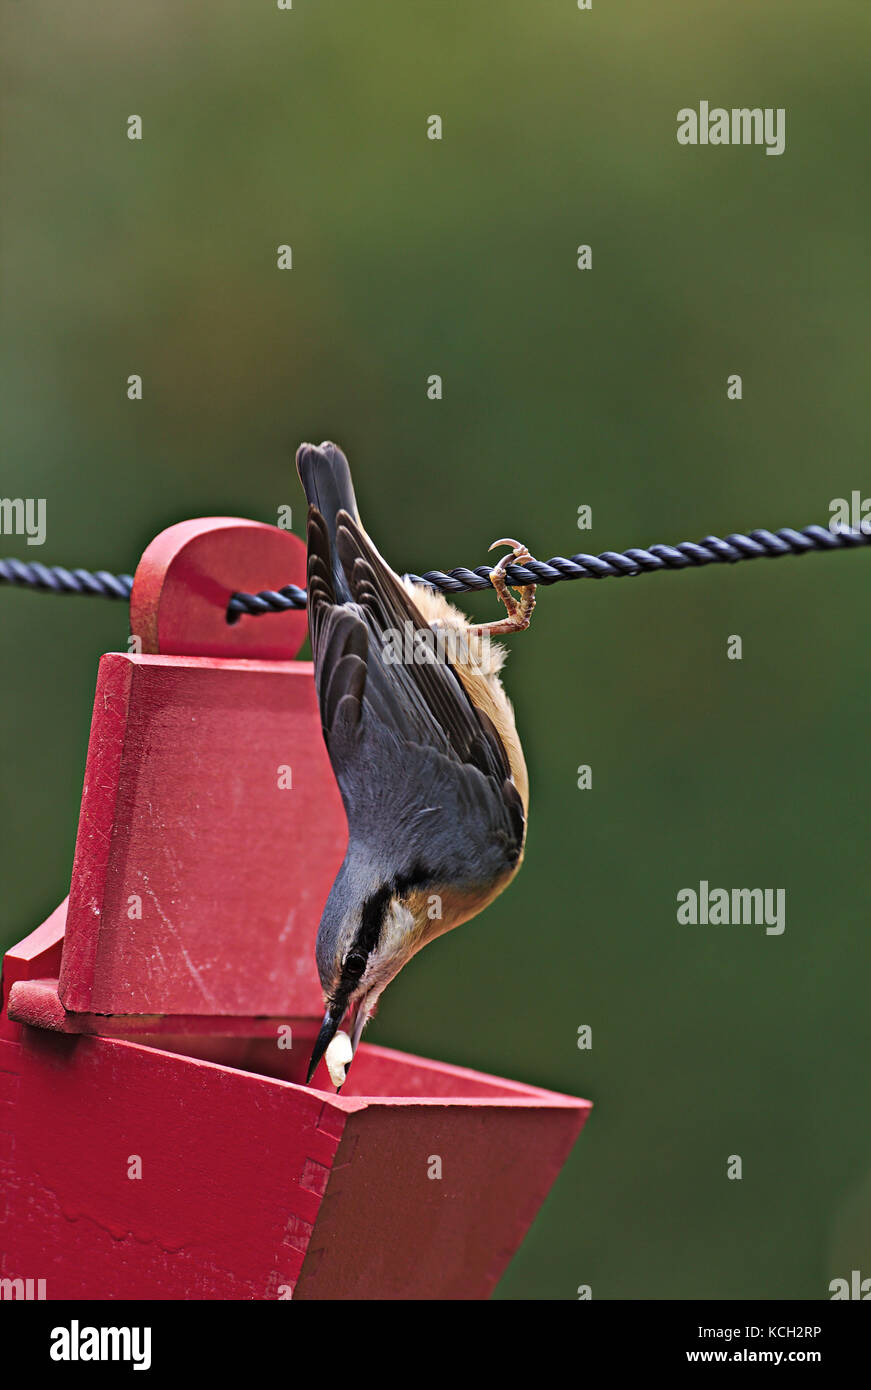 Eurasian nuthatch (sitta europaea), getting food from a red box hanging on a rope Stock Photo